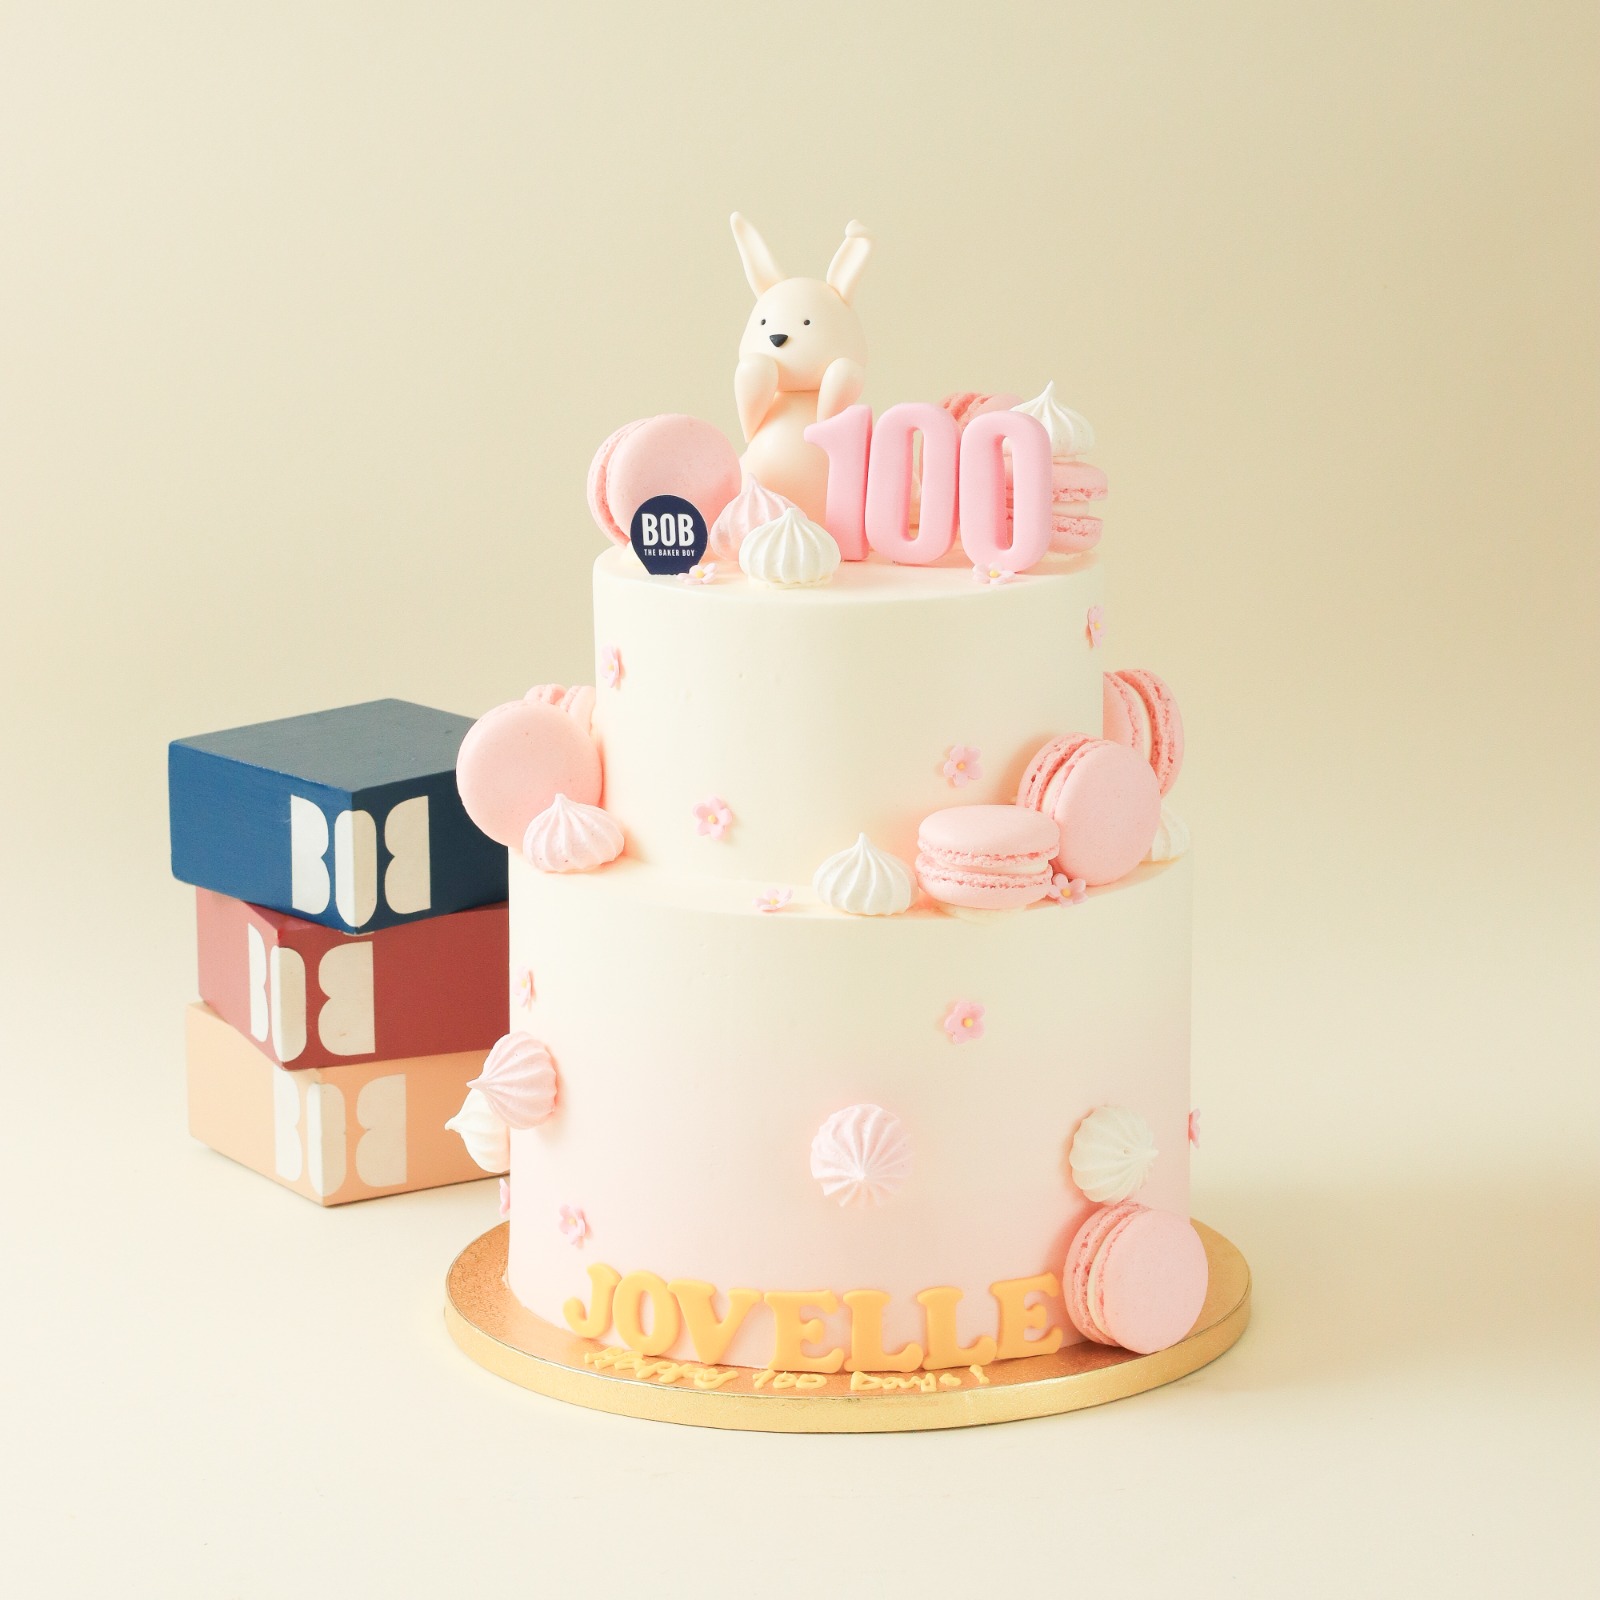 Shy Rabbit Bunny Cake in Pastel Pink Ombre and Macarons